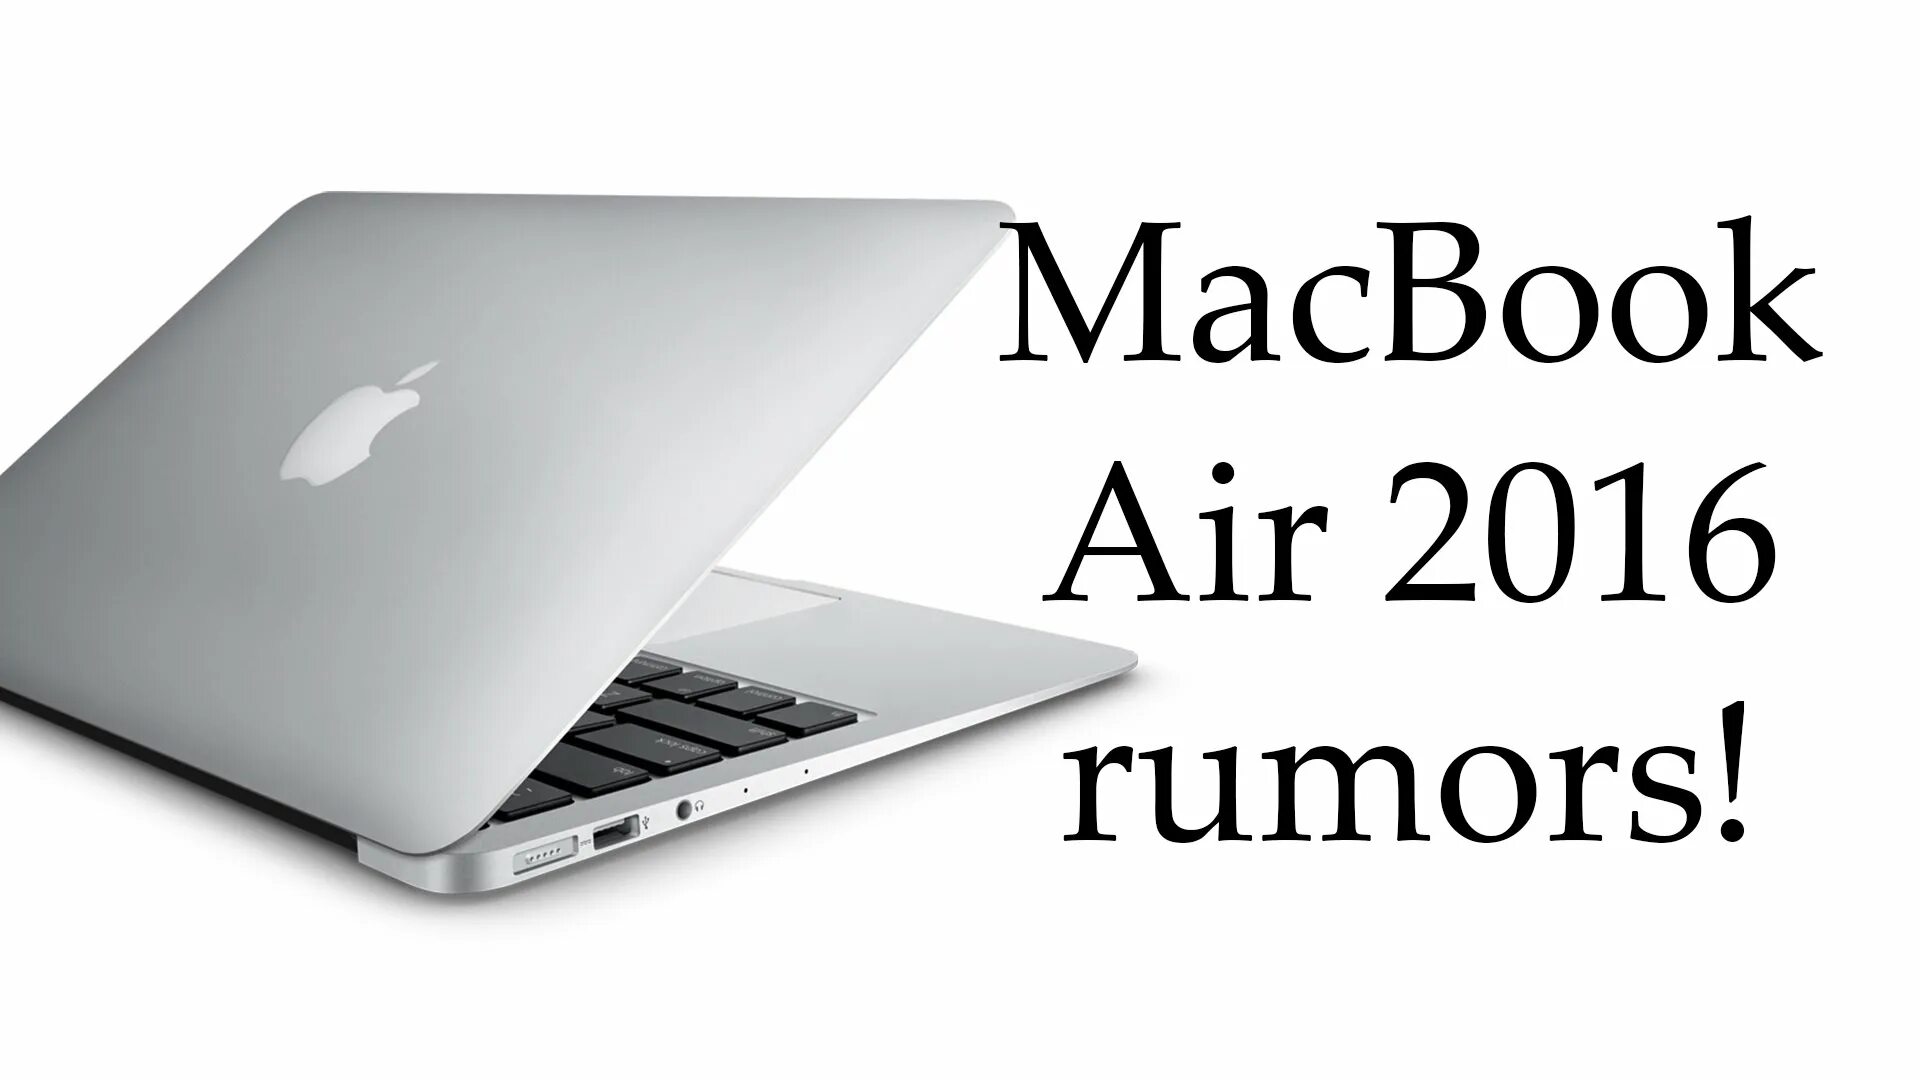 MACBOOK Air 2016. Макбук АИР про 2016 года. Макбук АИР 2016 USB. MACBOOK Air 2016 характеристики. Appear on the most